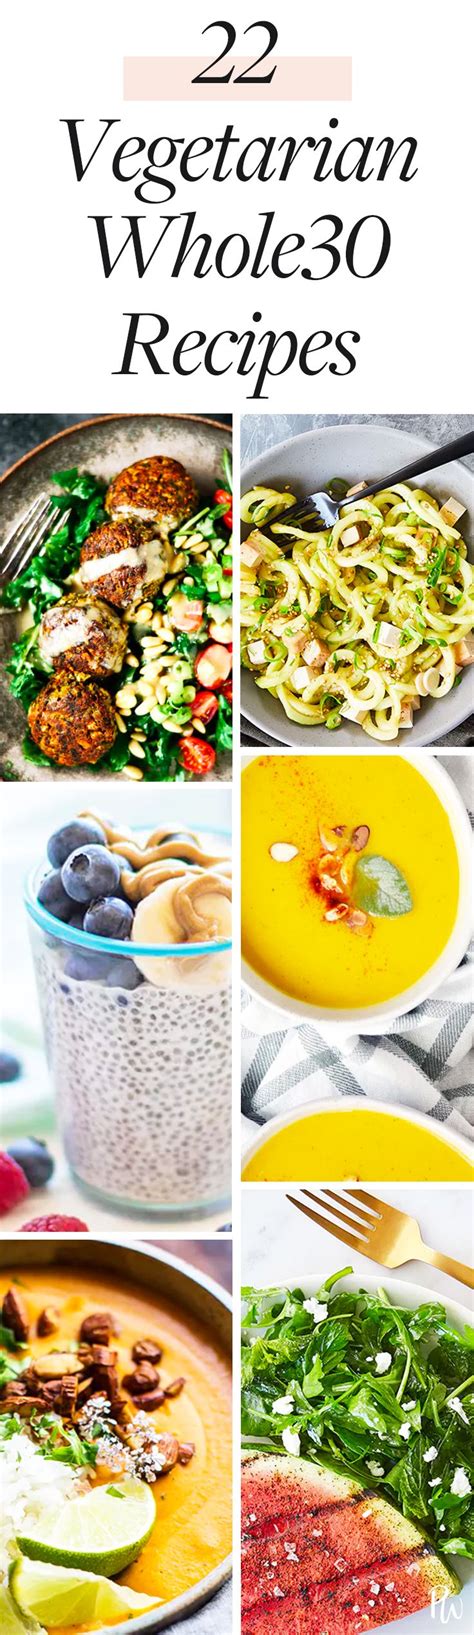 35 Whole30 Vegetarian Recipes To Try Whole 30 Recipes Vegetarian